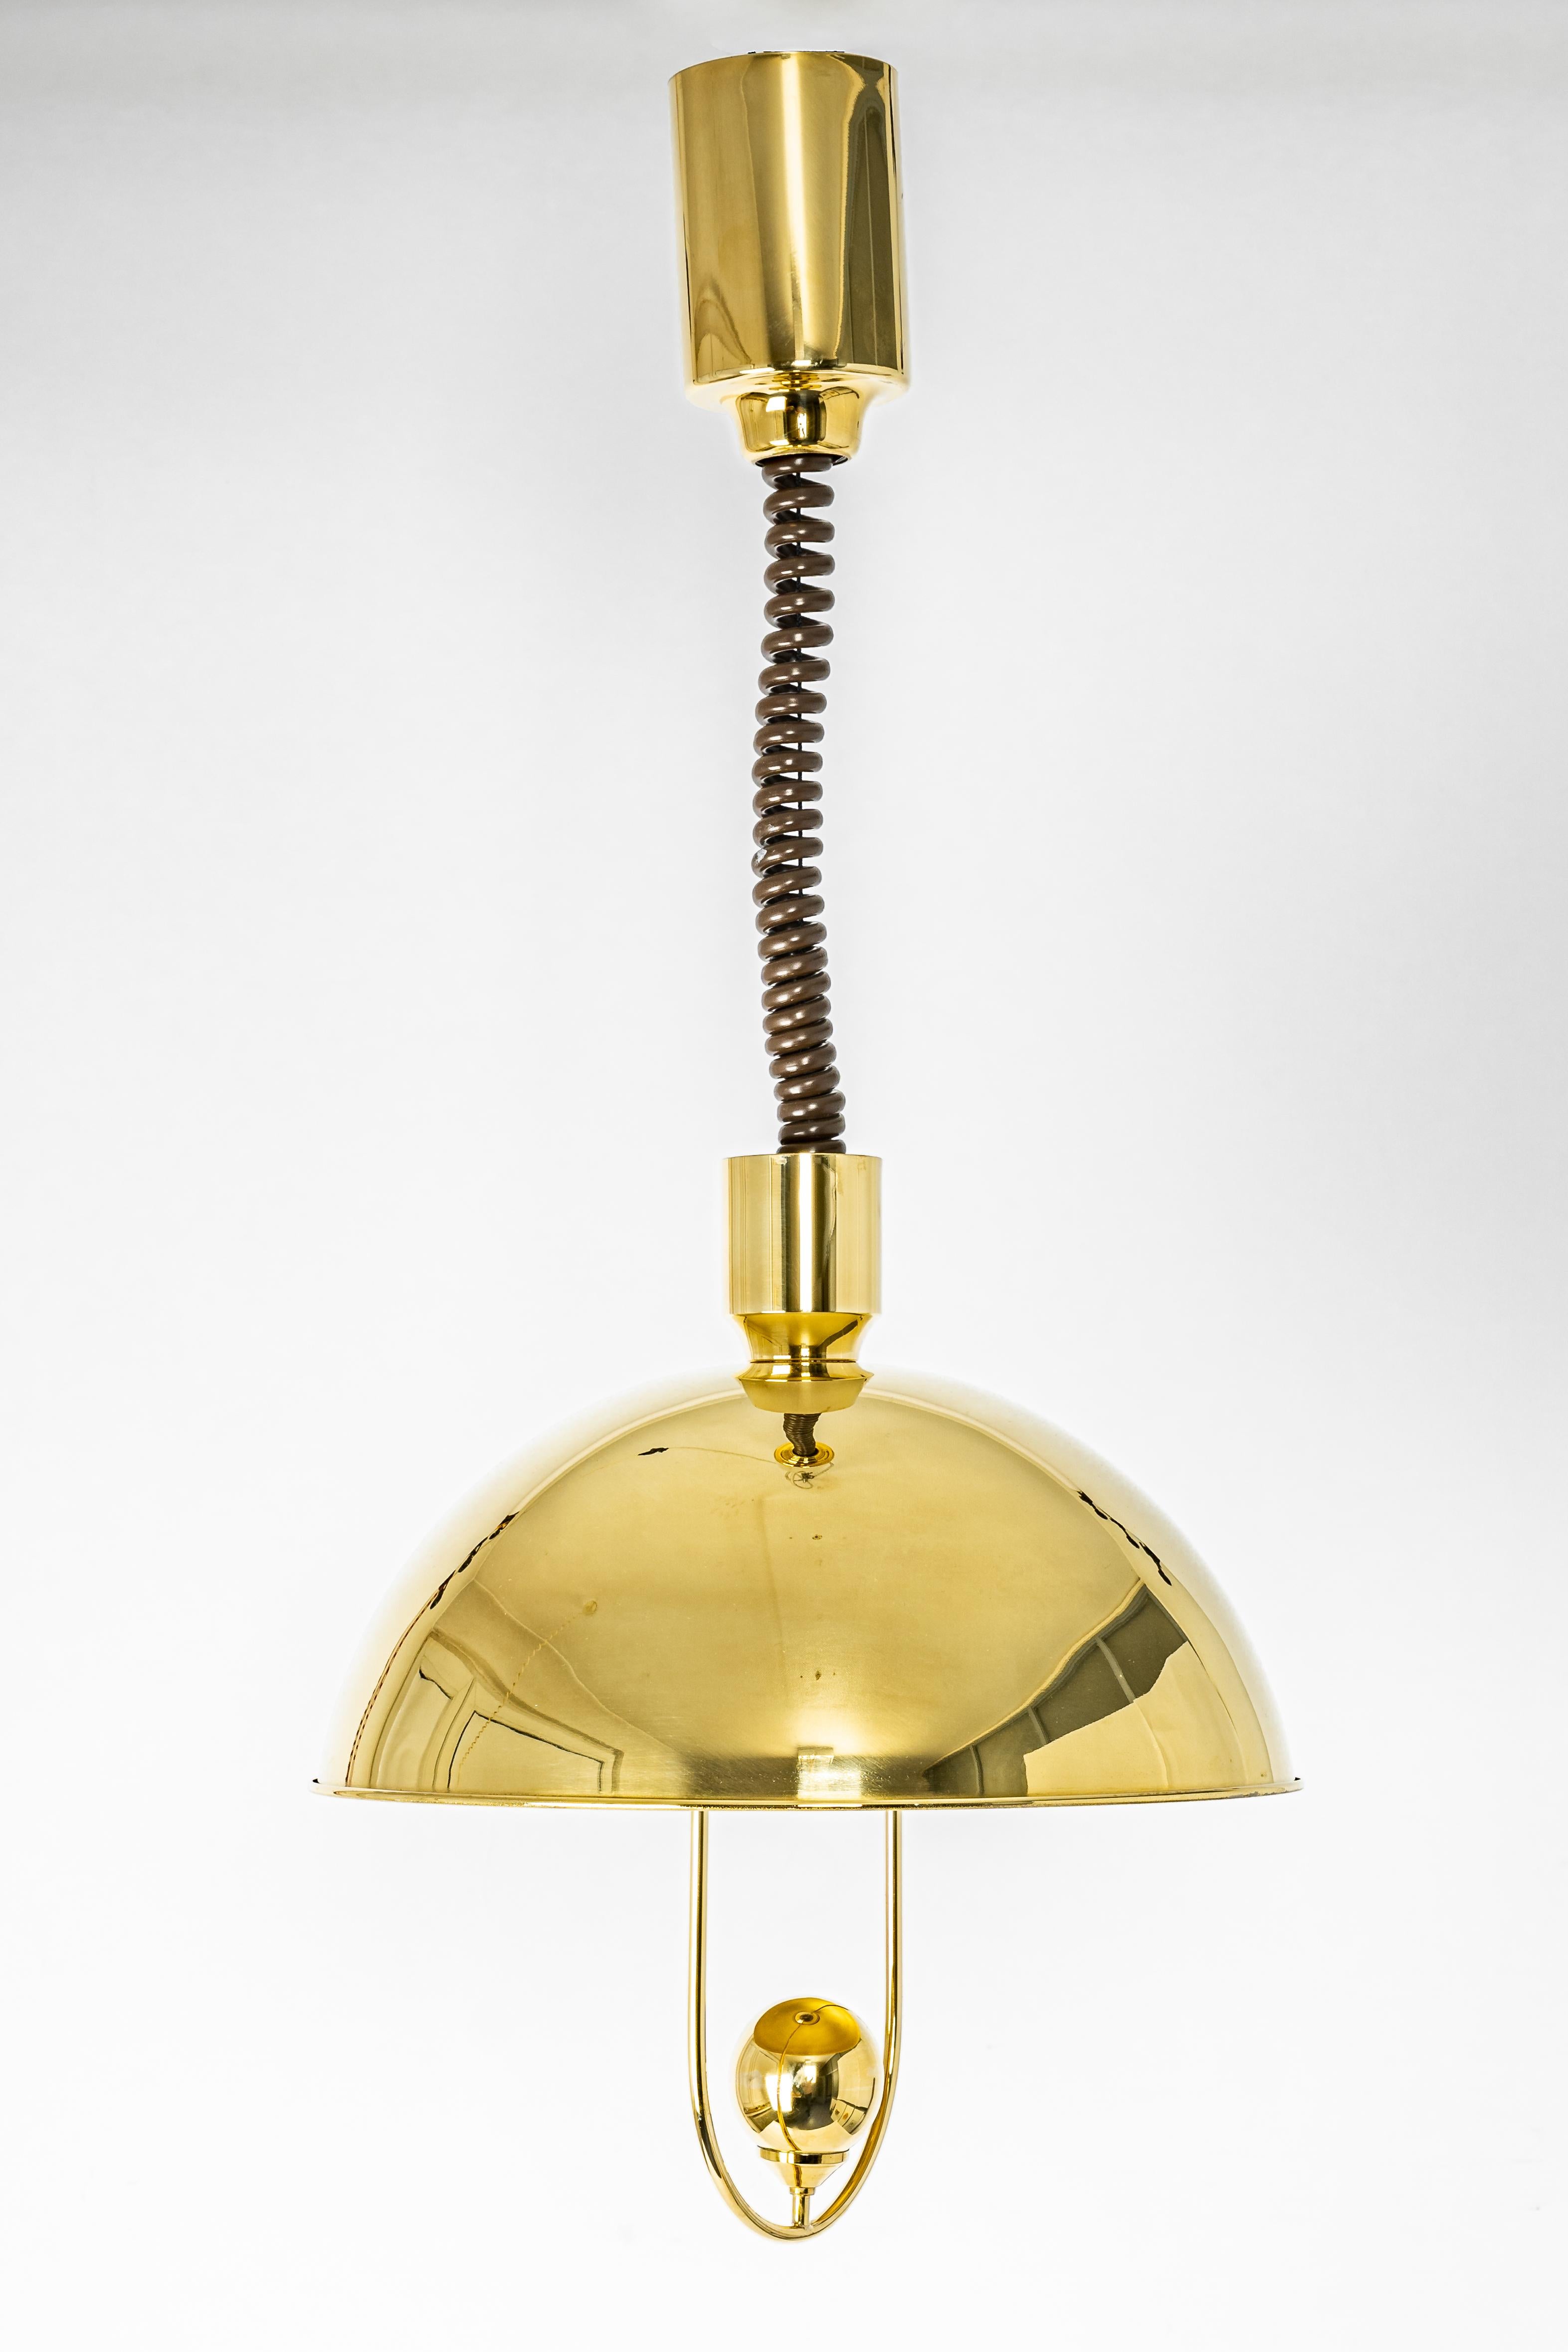 Petite brass pendant light designed by Florian Schulz, Germany, 1970s.

High quality and in very good condition. Cleaned, well-wired and ready to use. 

The fixture requires one standard bulb
Light bulbs are not included. It is possible to